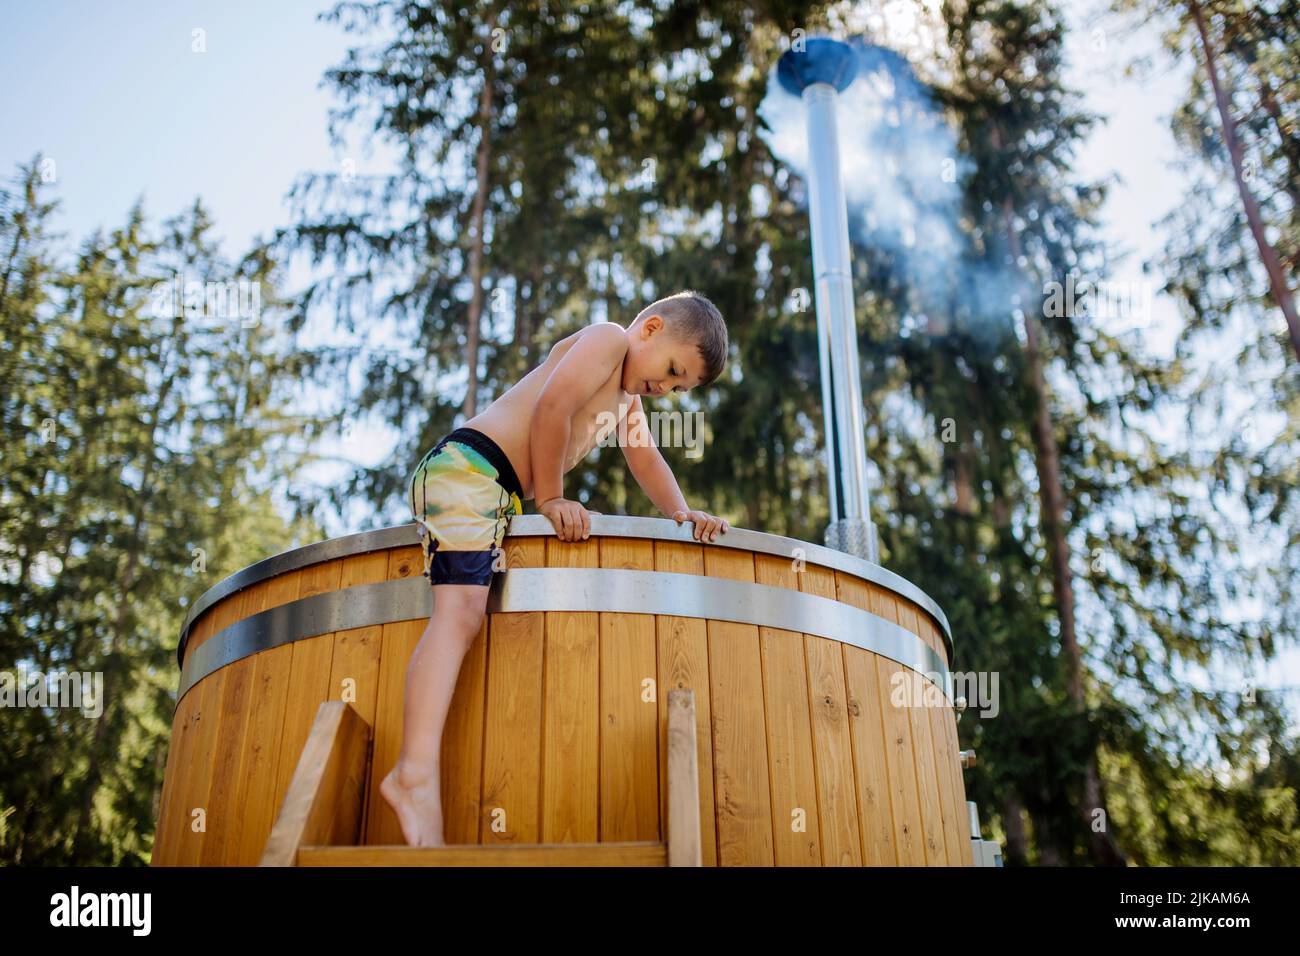 Little boy in swimsuit climbing in the outdoor wooden hot tub,surrounded by forest, during sunny summer day. Low angle view. Stock Photo